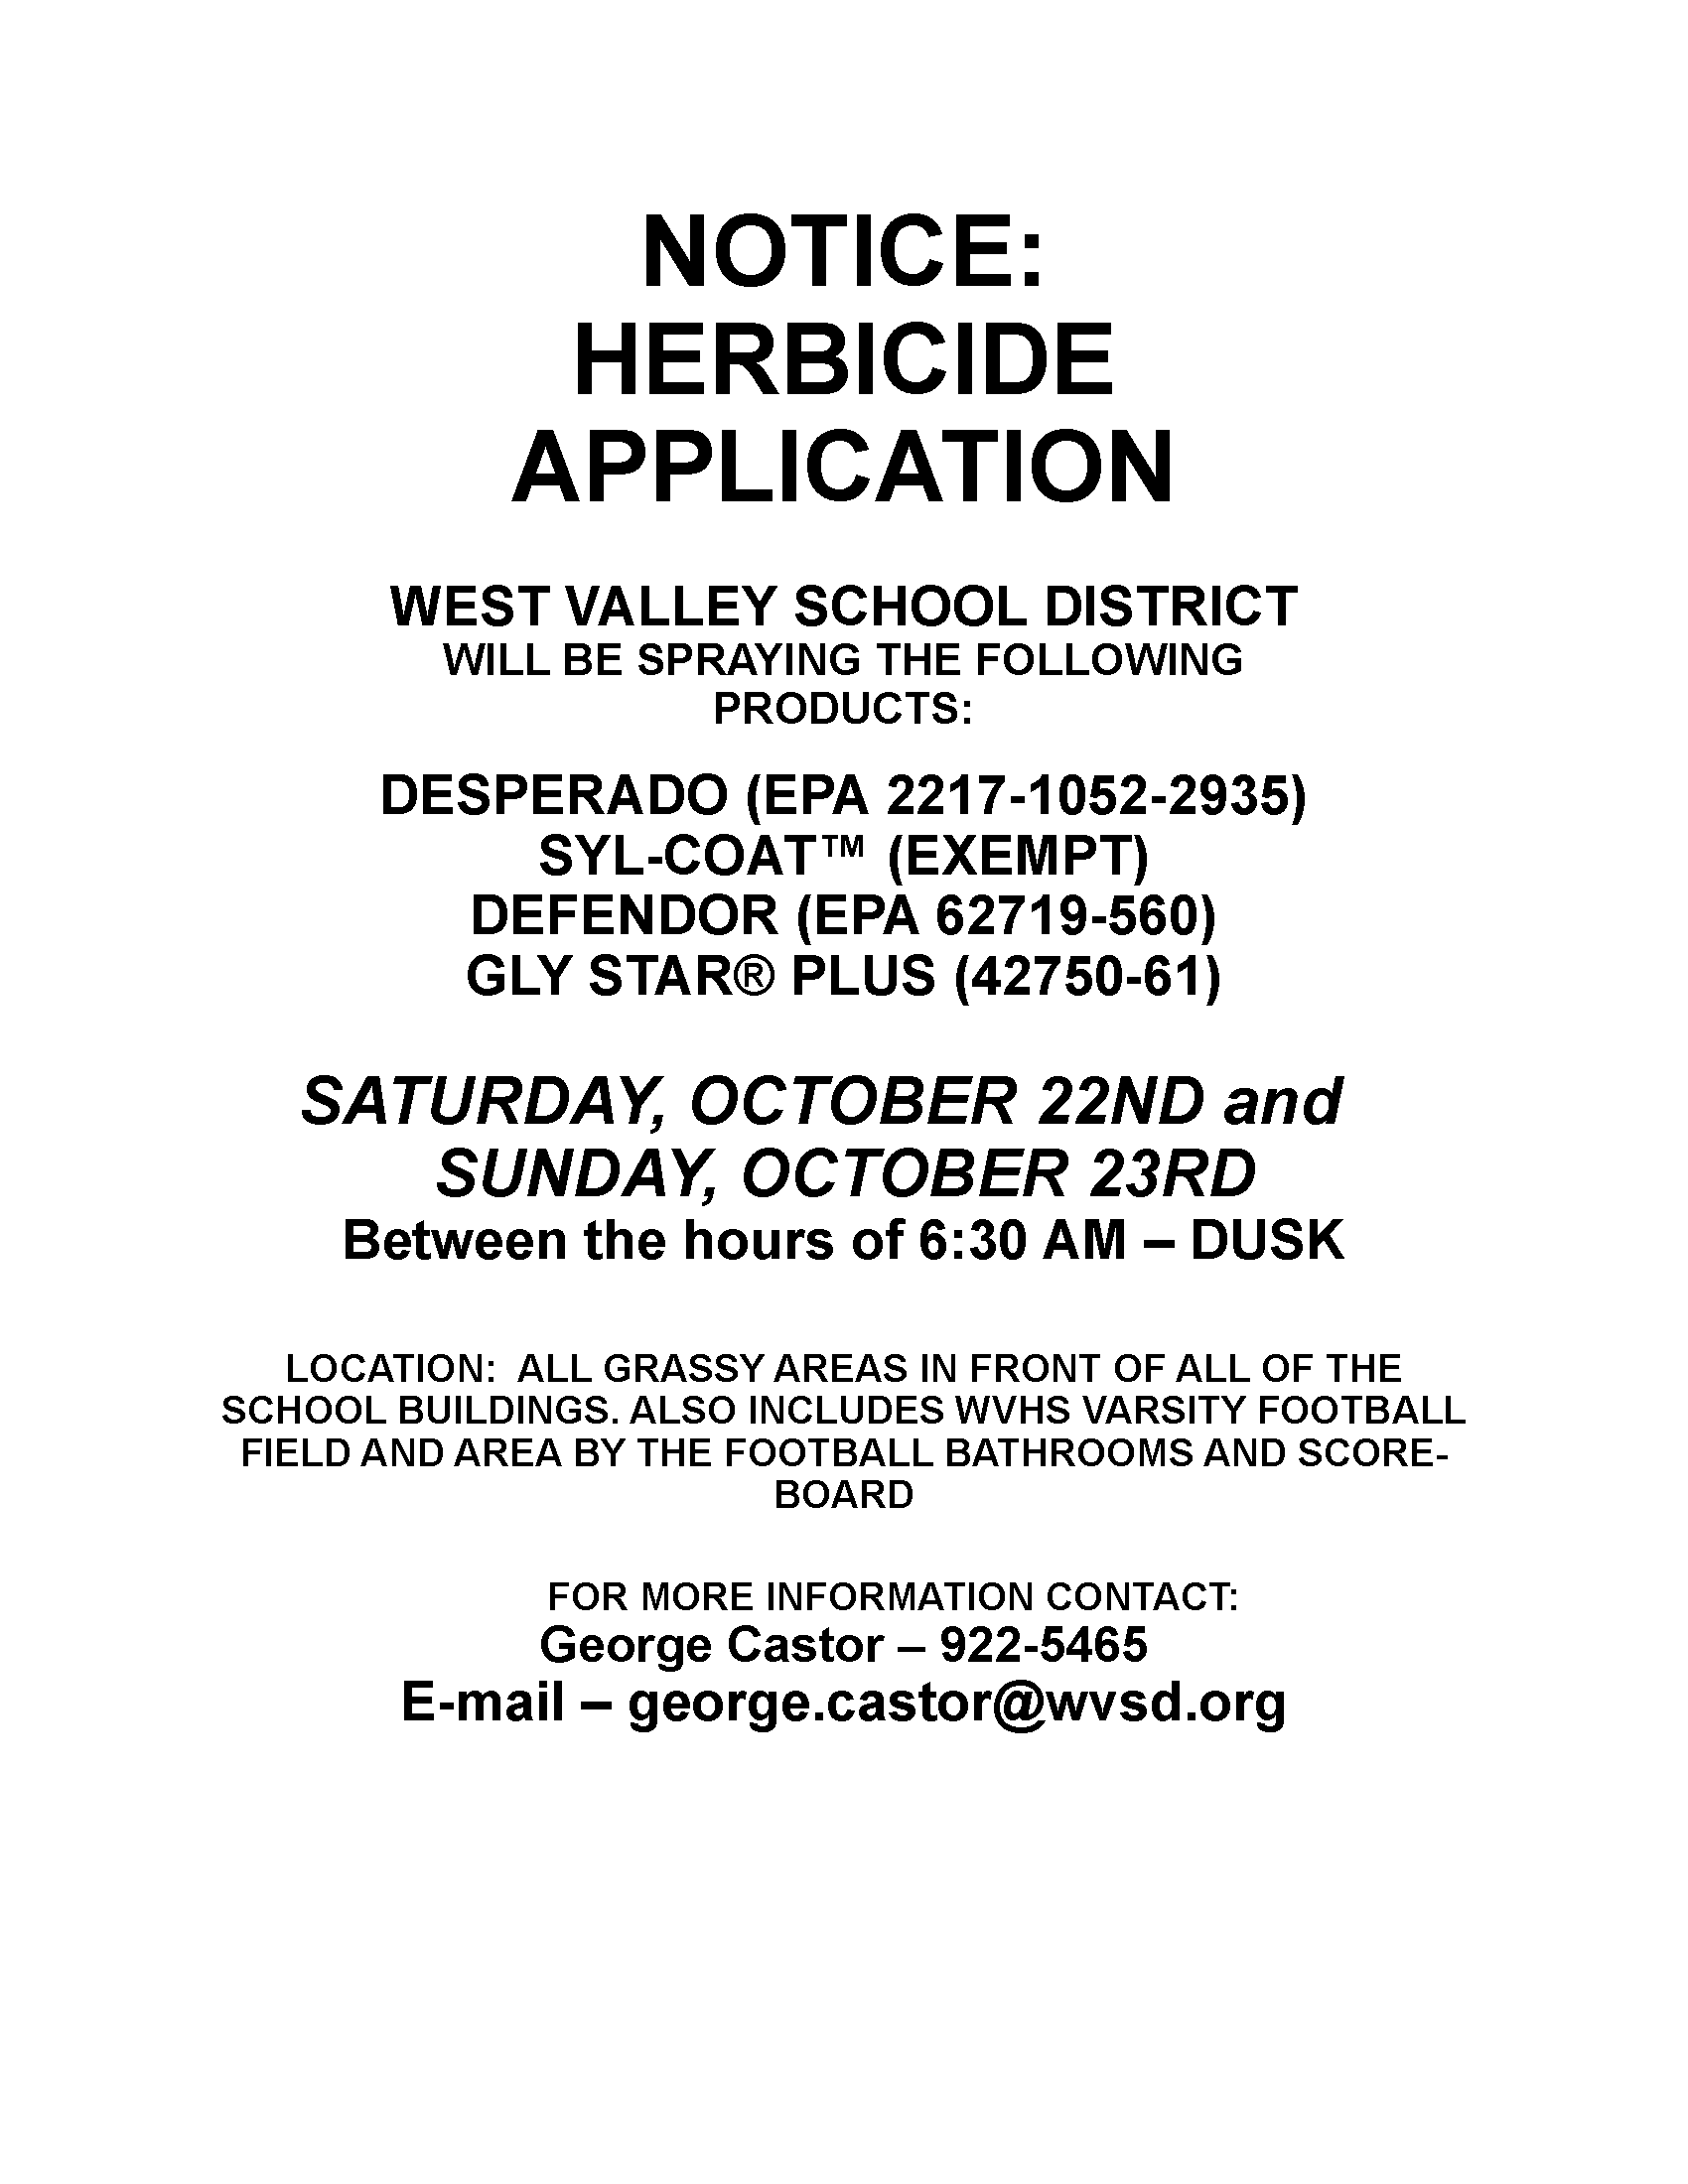 Herbicide application fall 2022